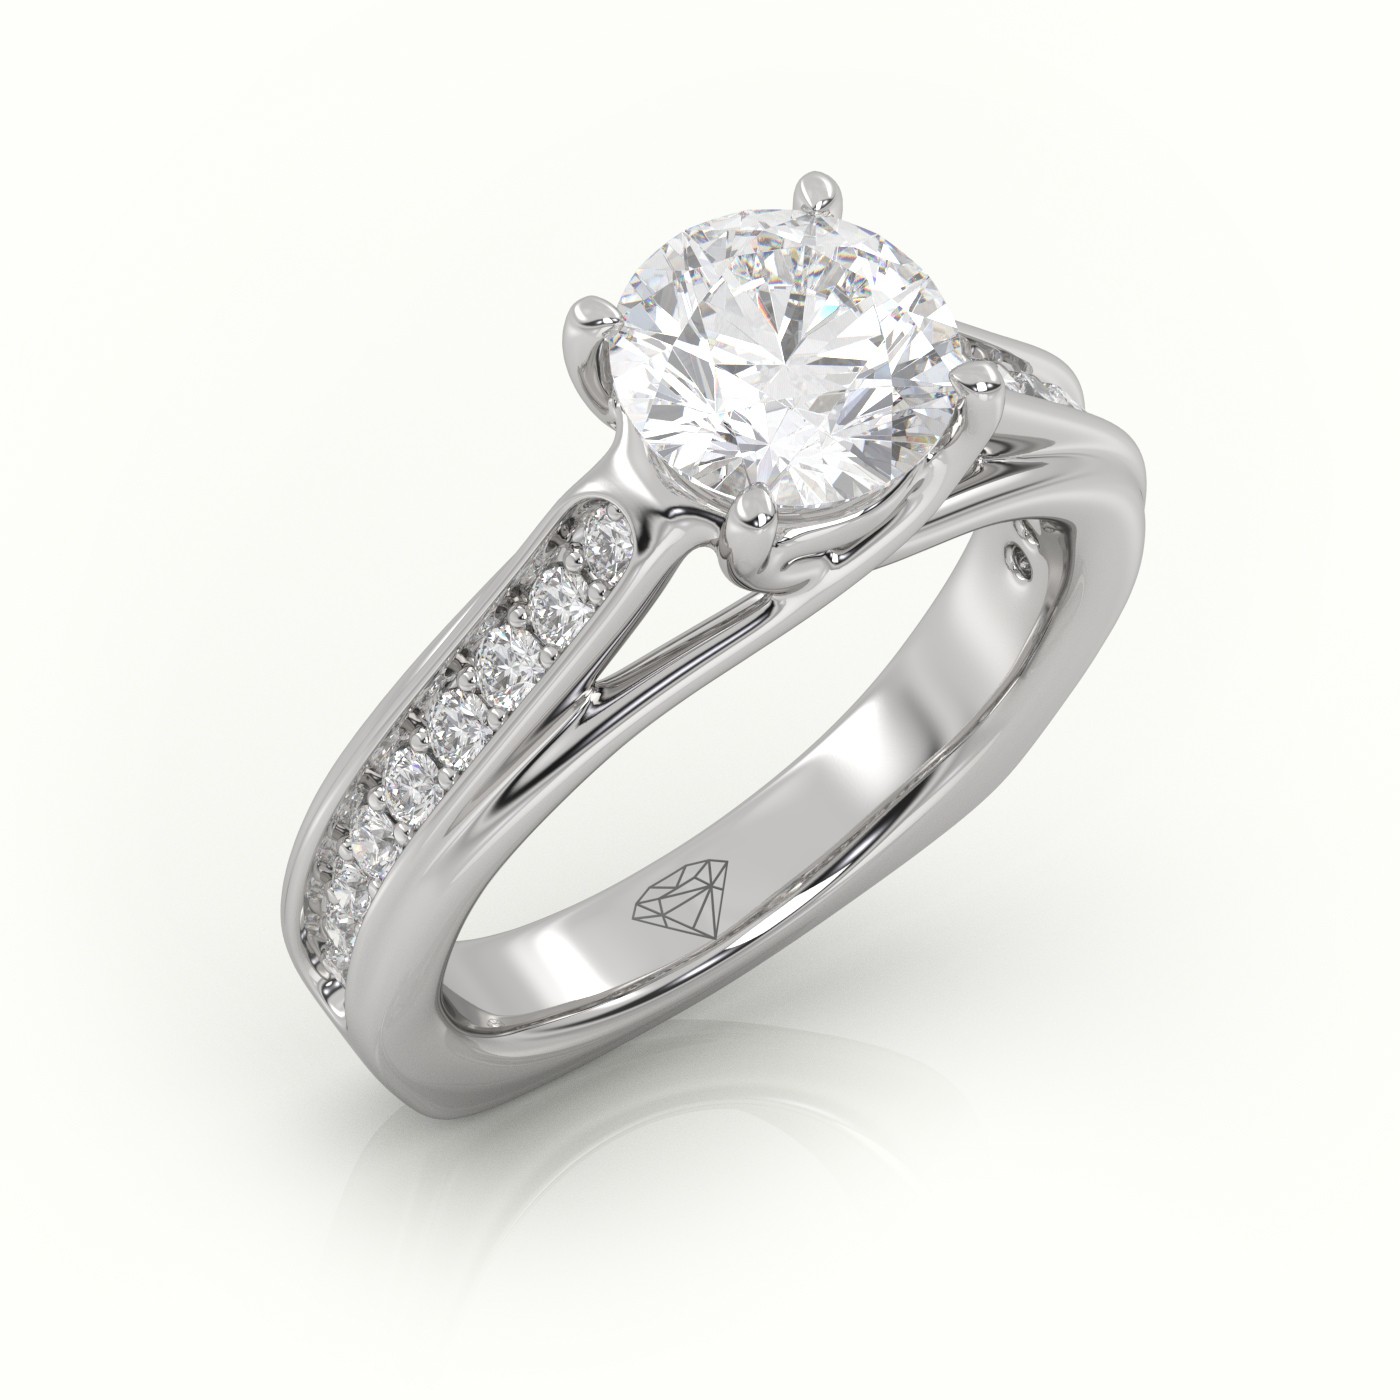 18K WHITE GOLD ROUND CUT DIAMOND CHANNEL SETTING ENGAGEMENT RING